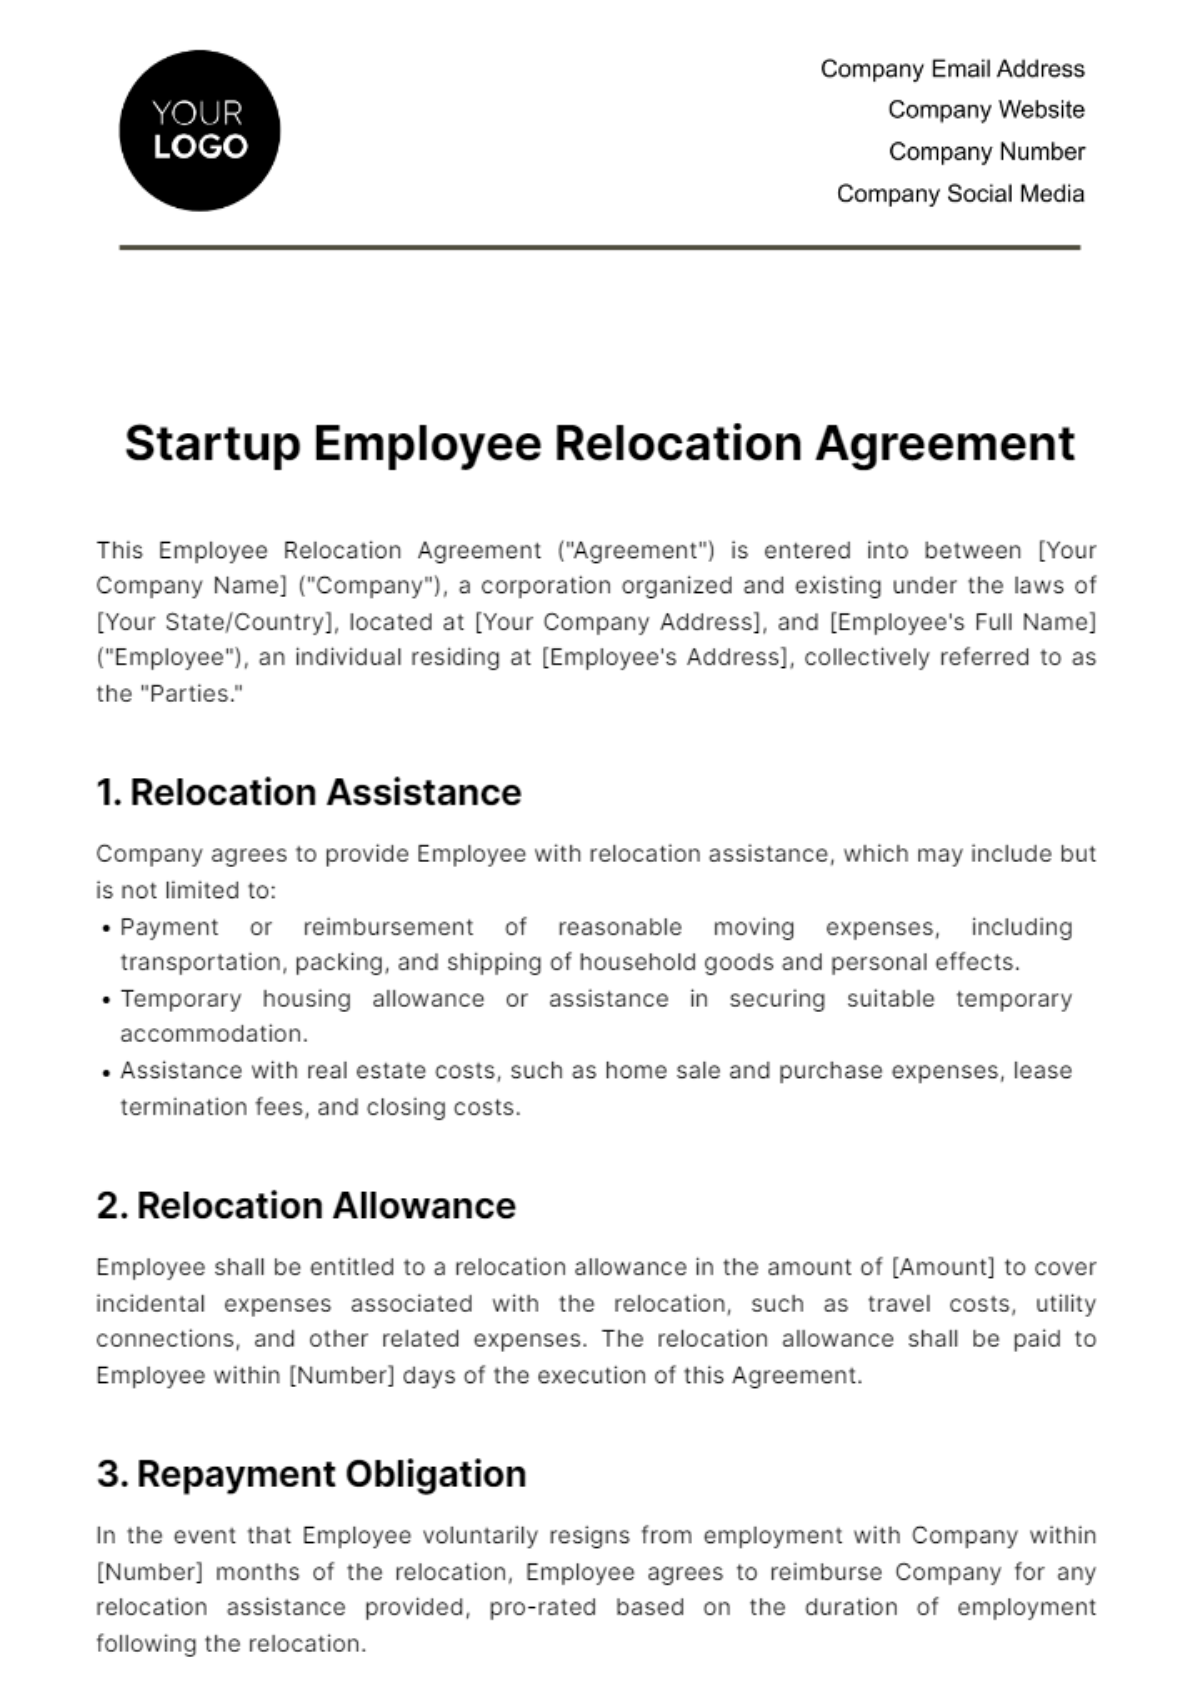 Free Startup Employee Relocation Agreement Template